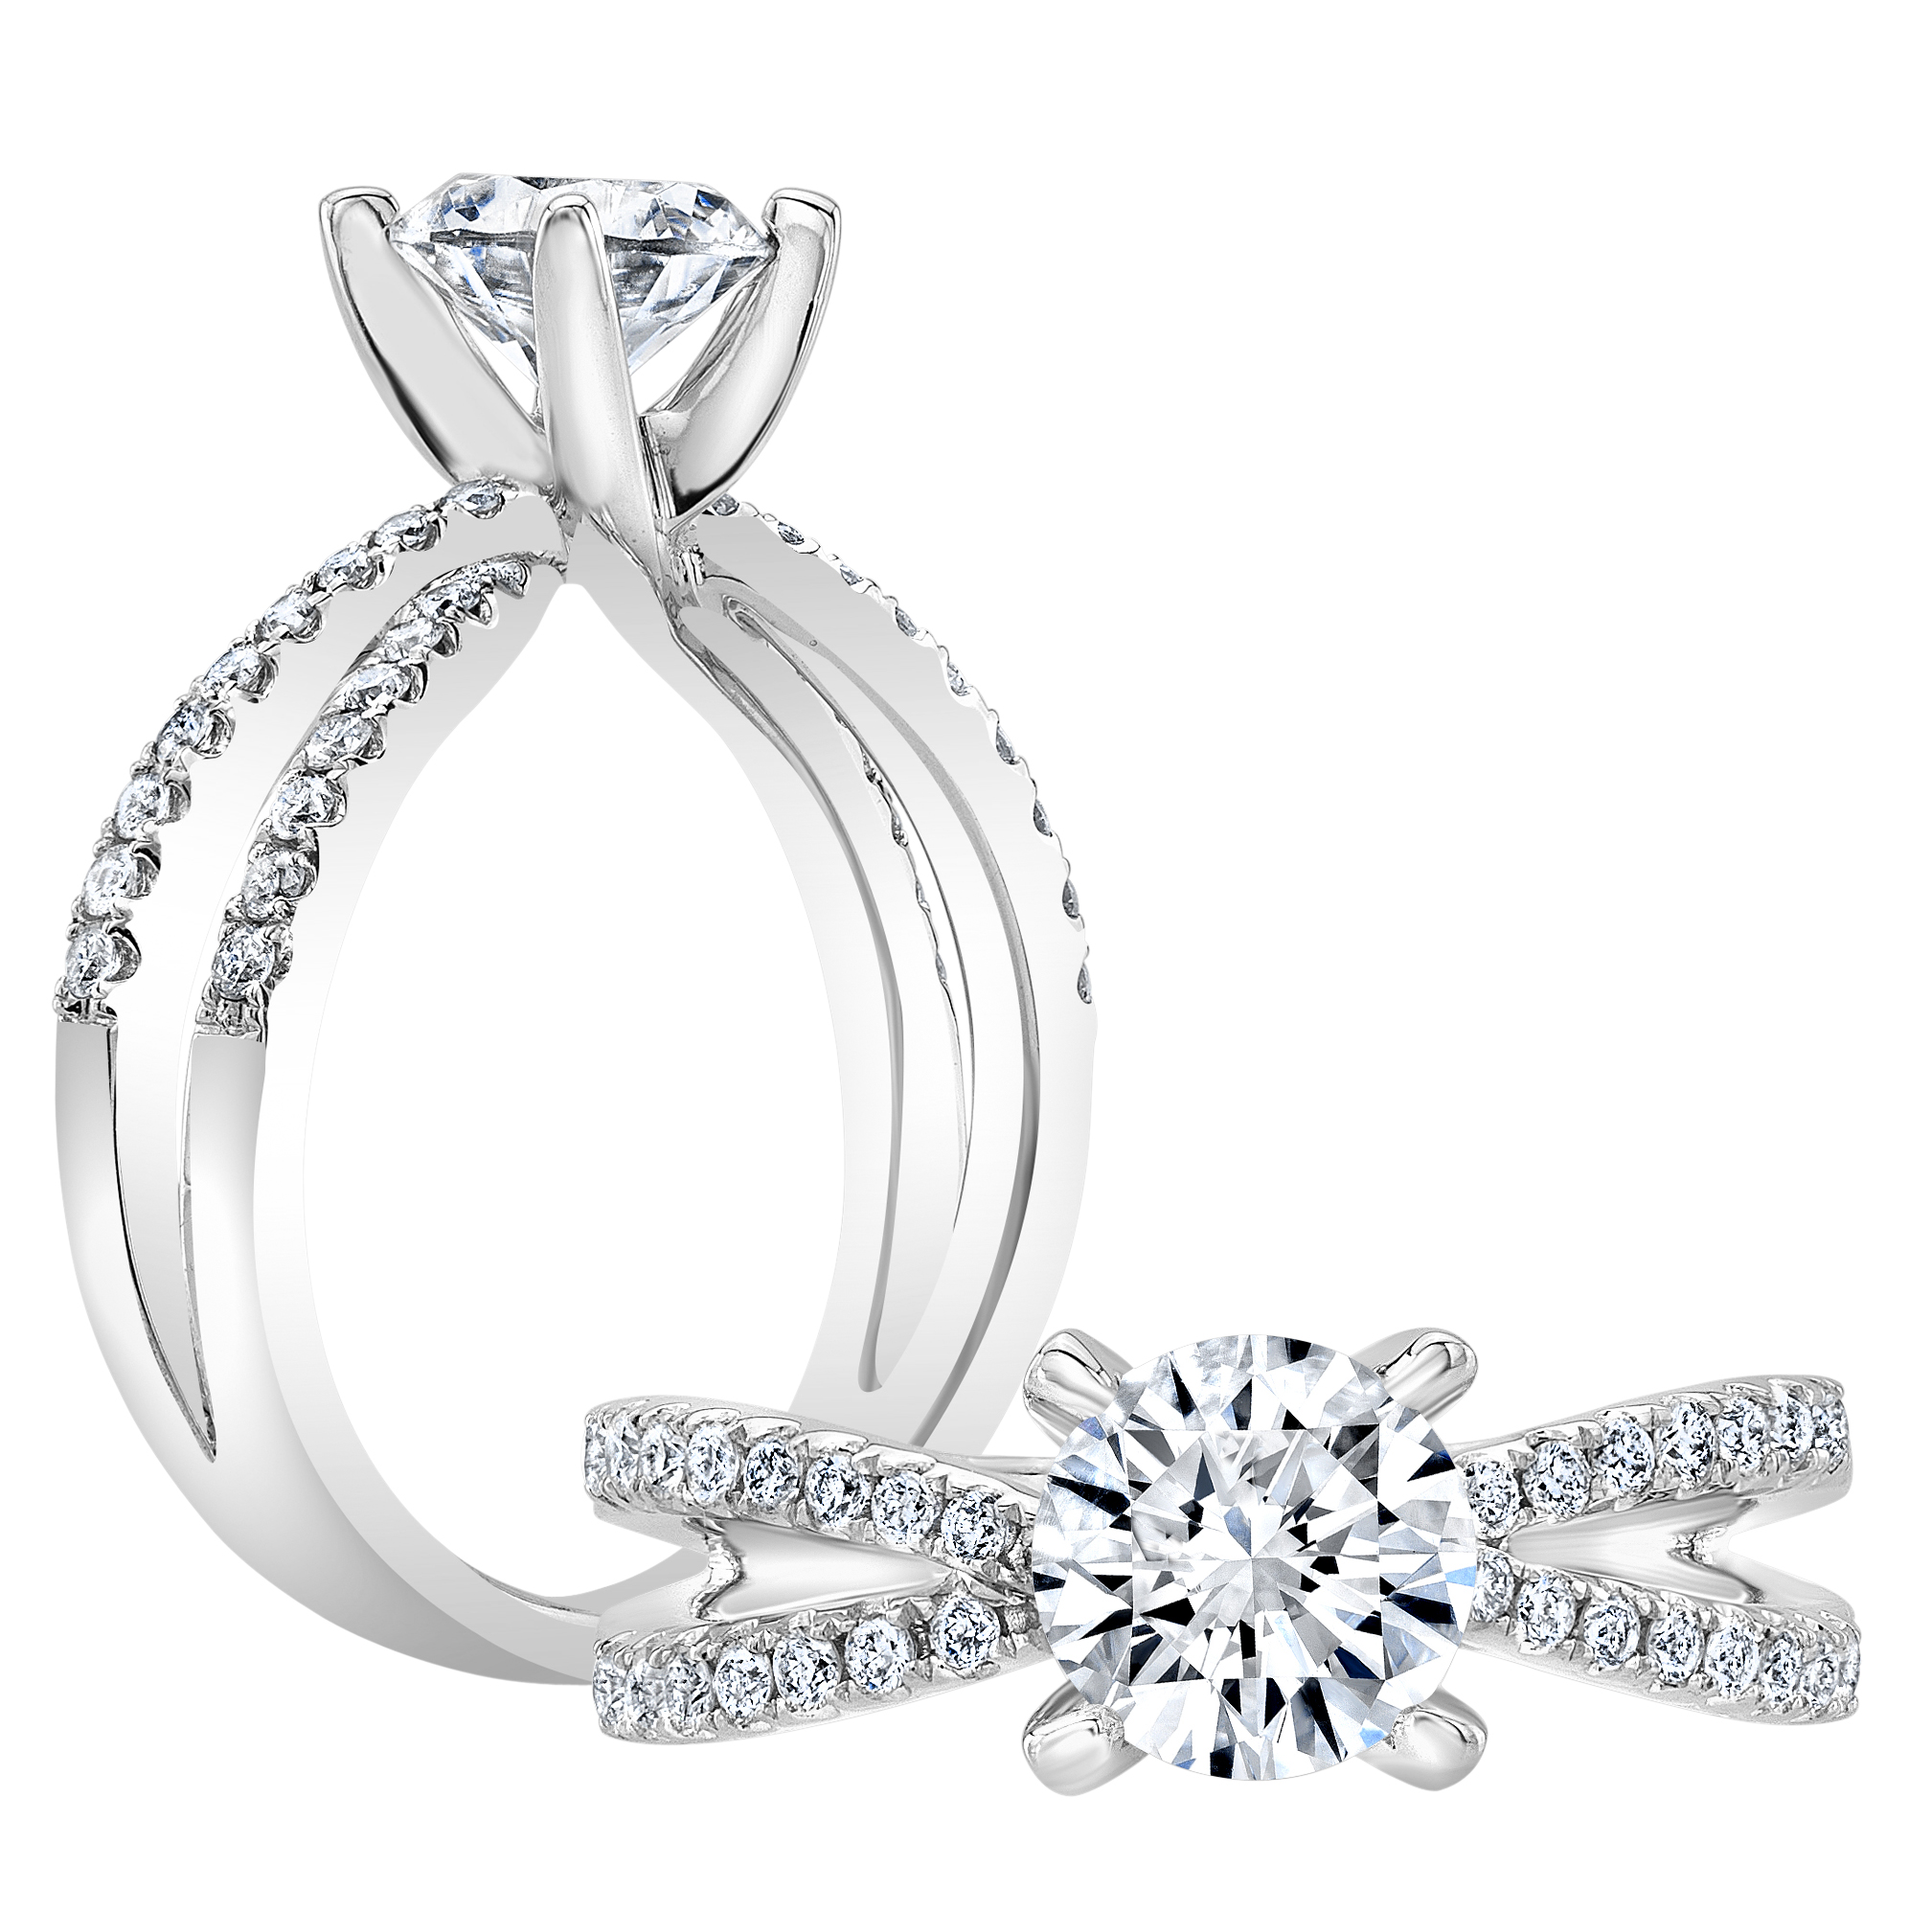 ENGR03153 Twist Shank Pave Diamond Band Solitaire Engagement Ring